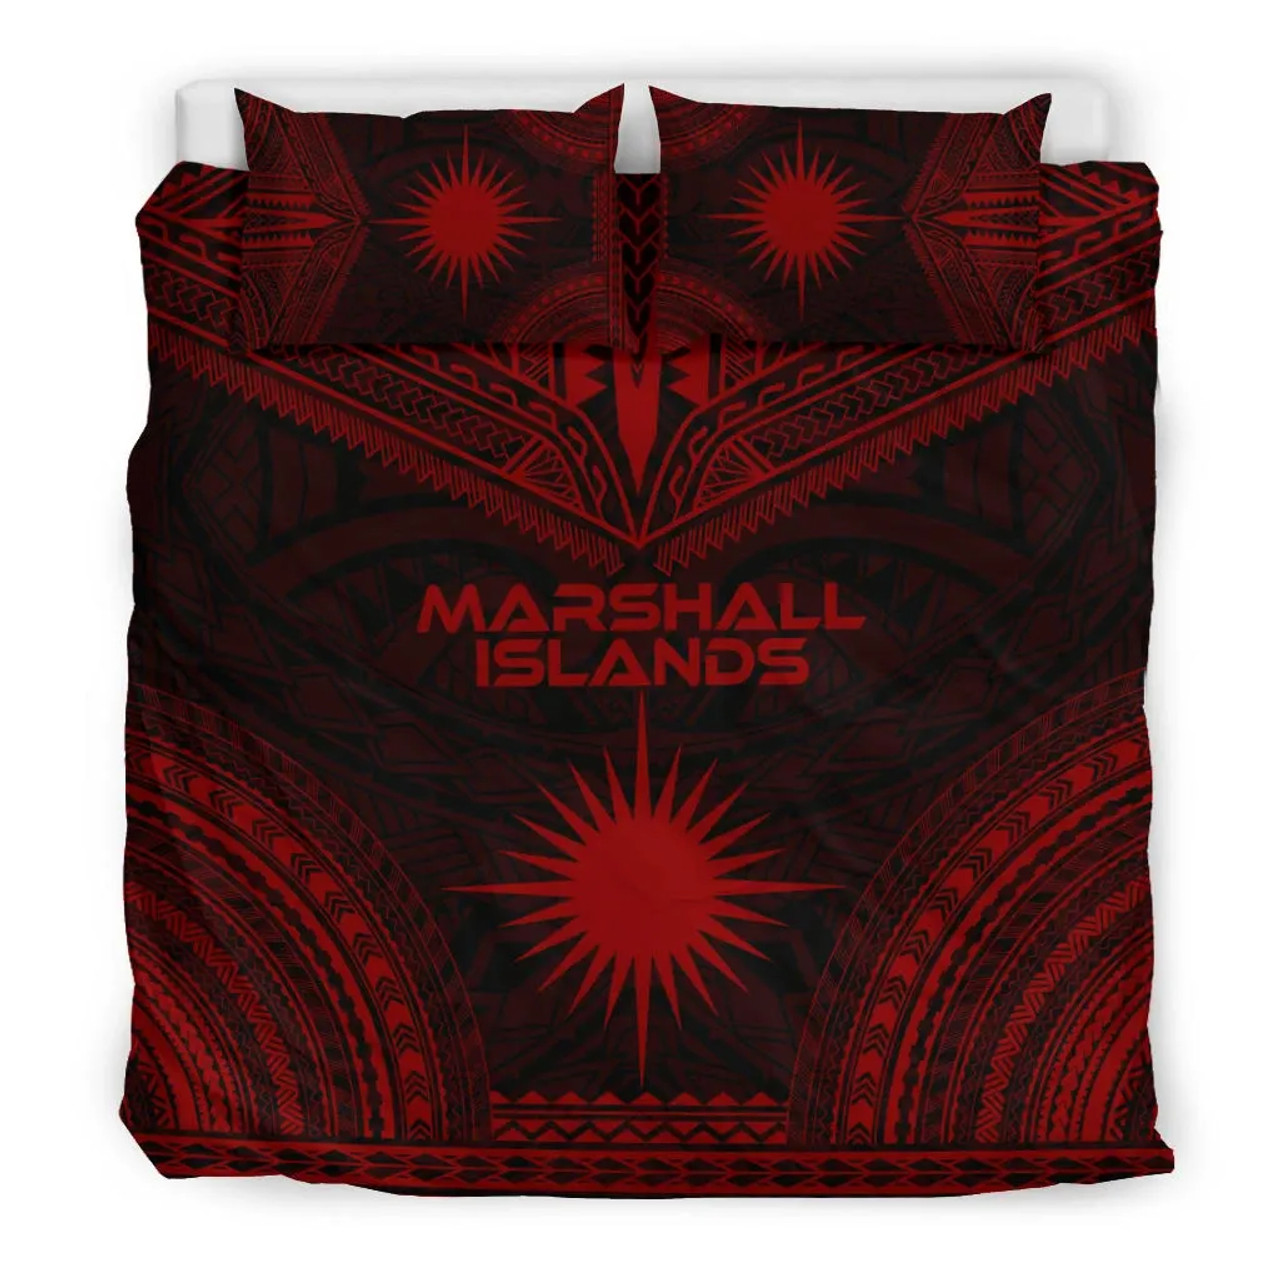 Marshall Islands Polynesian Chief Duvet Cover Set - Red Version 3